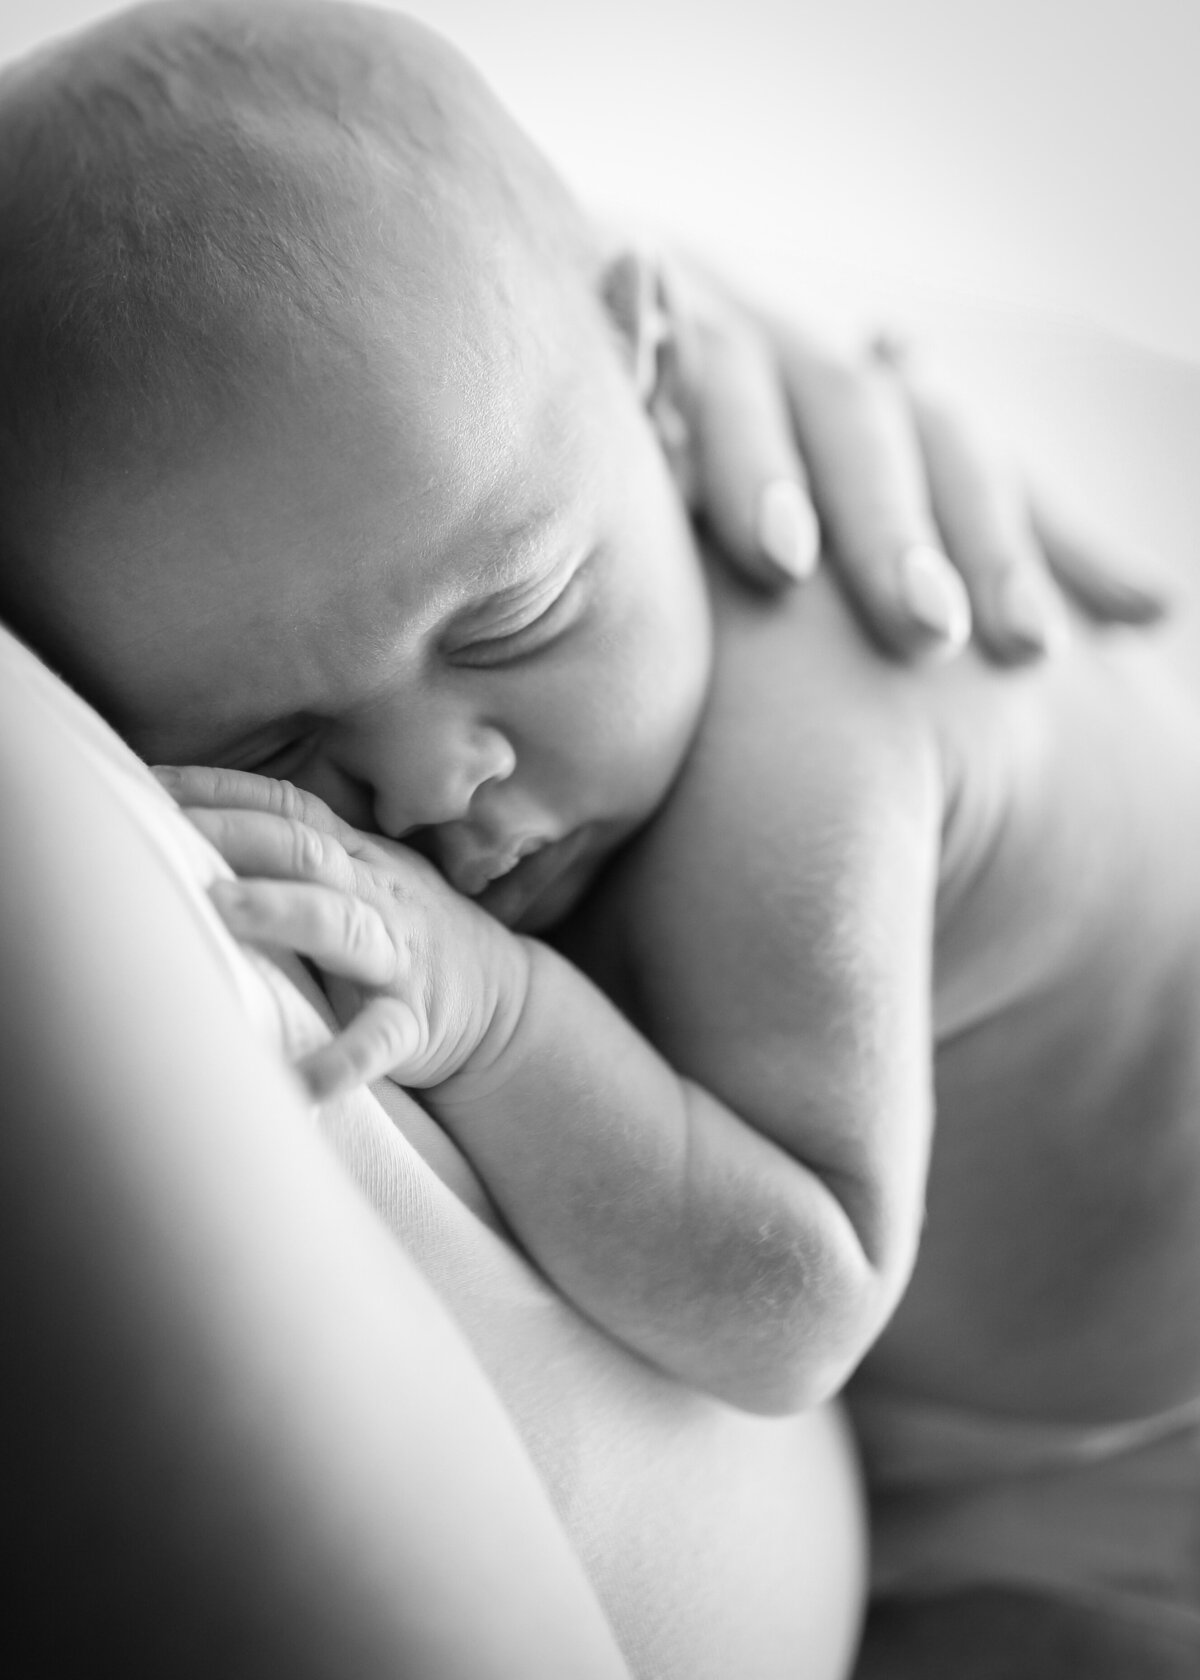 Vanessa is an experienced photographer specialising in newborns and babies